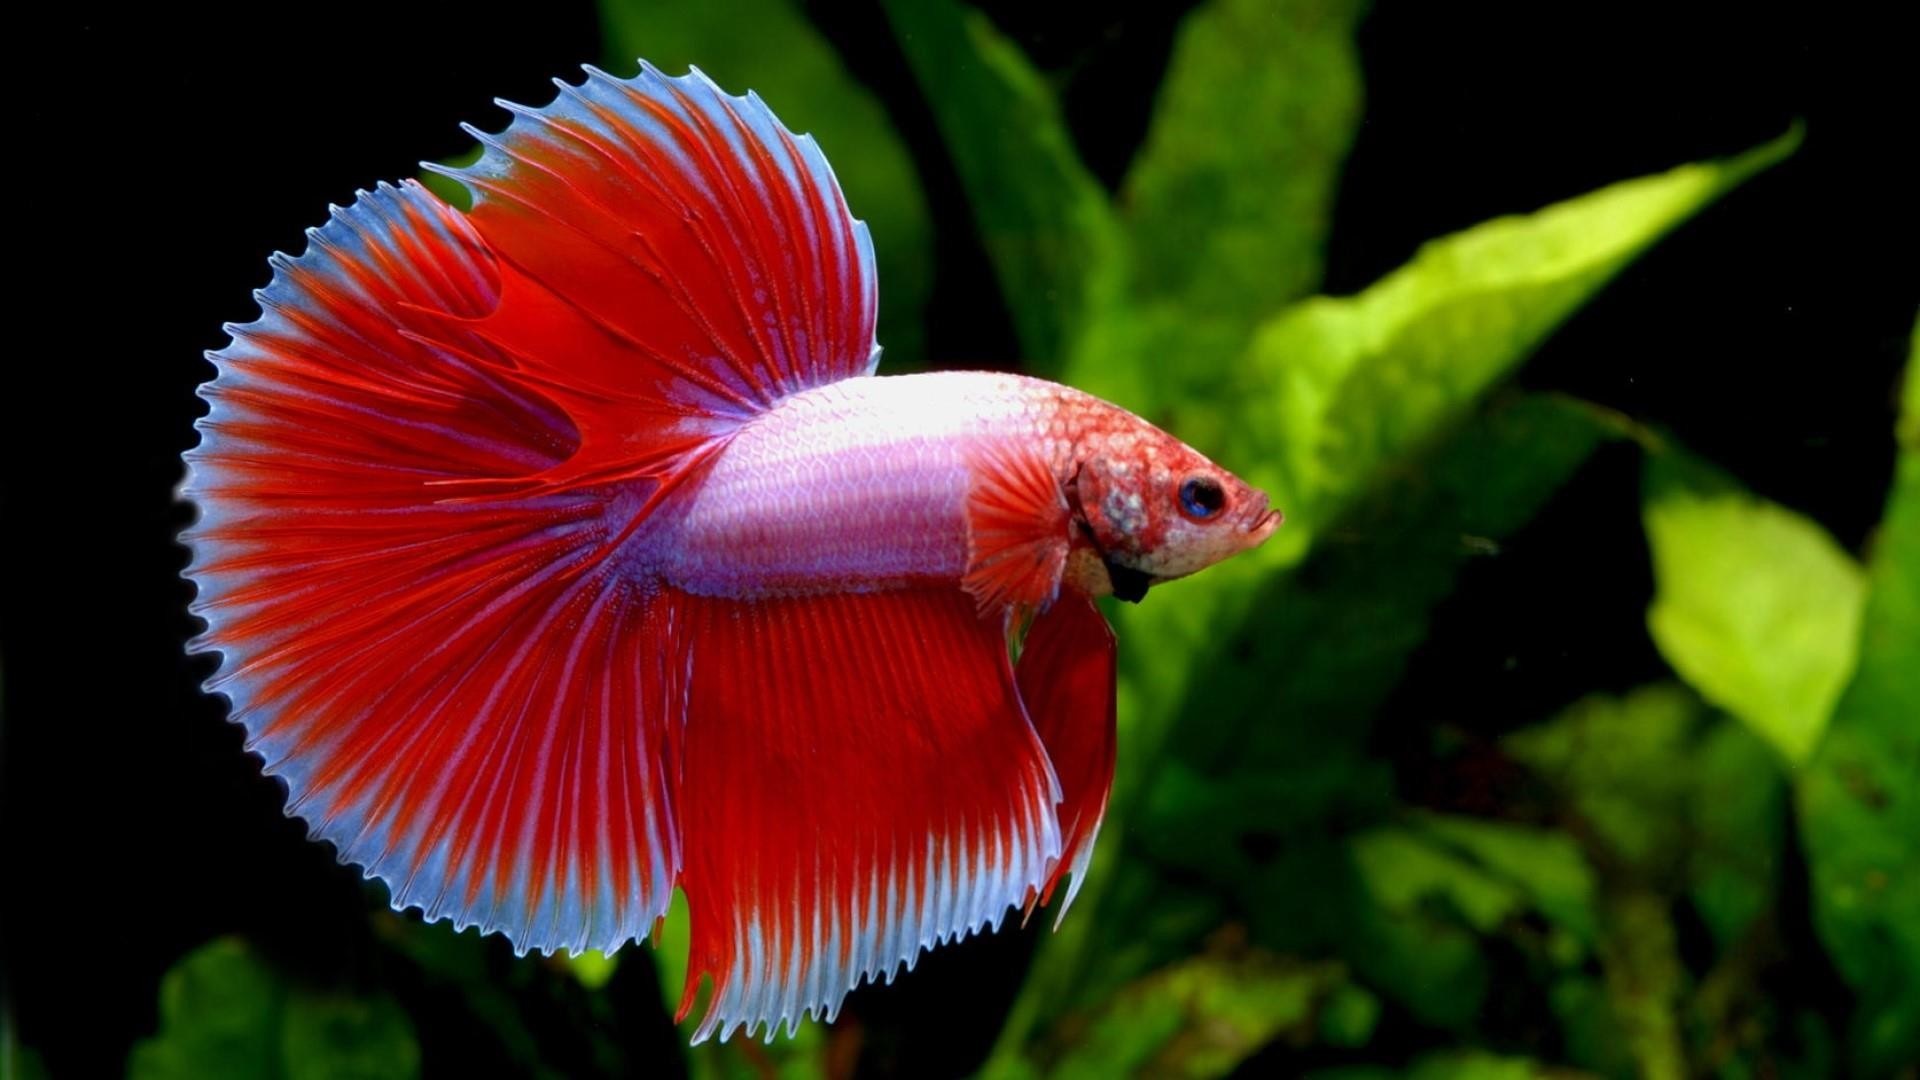 Comparison of Veil Tail, Crown Tail, and Half-Moon Betta Fish Fin Types